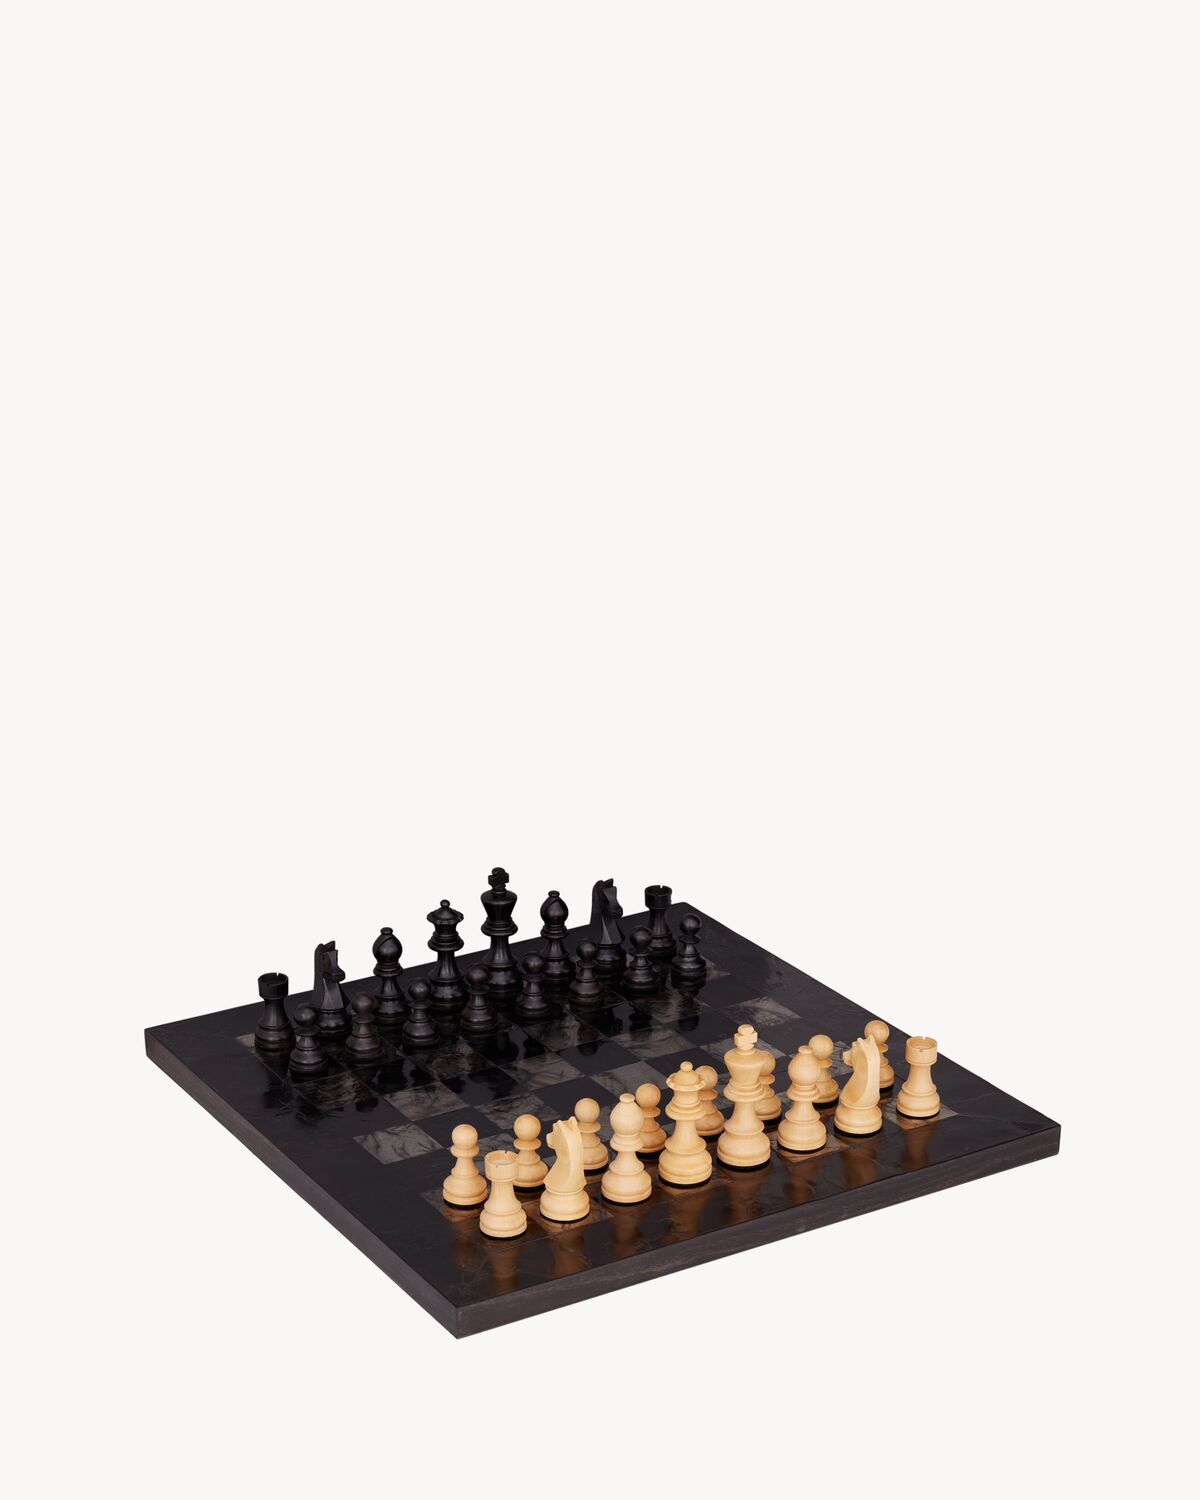 CHESS SET IN MICA STONE